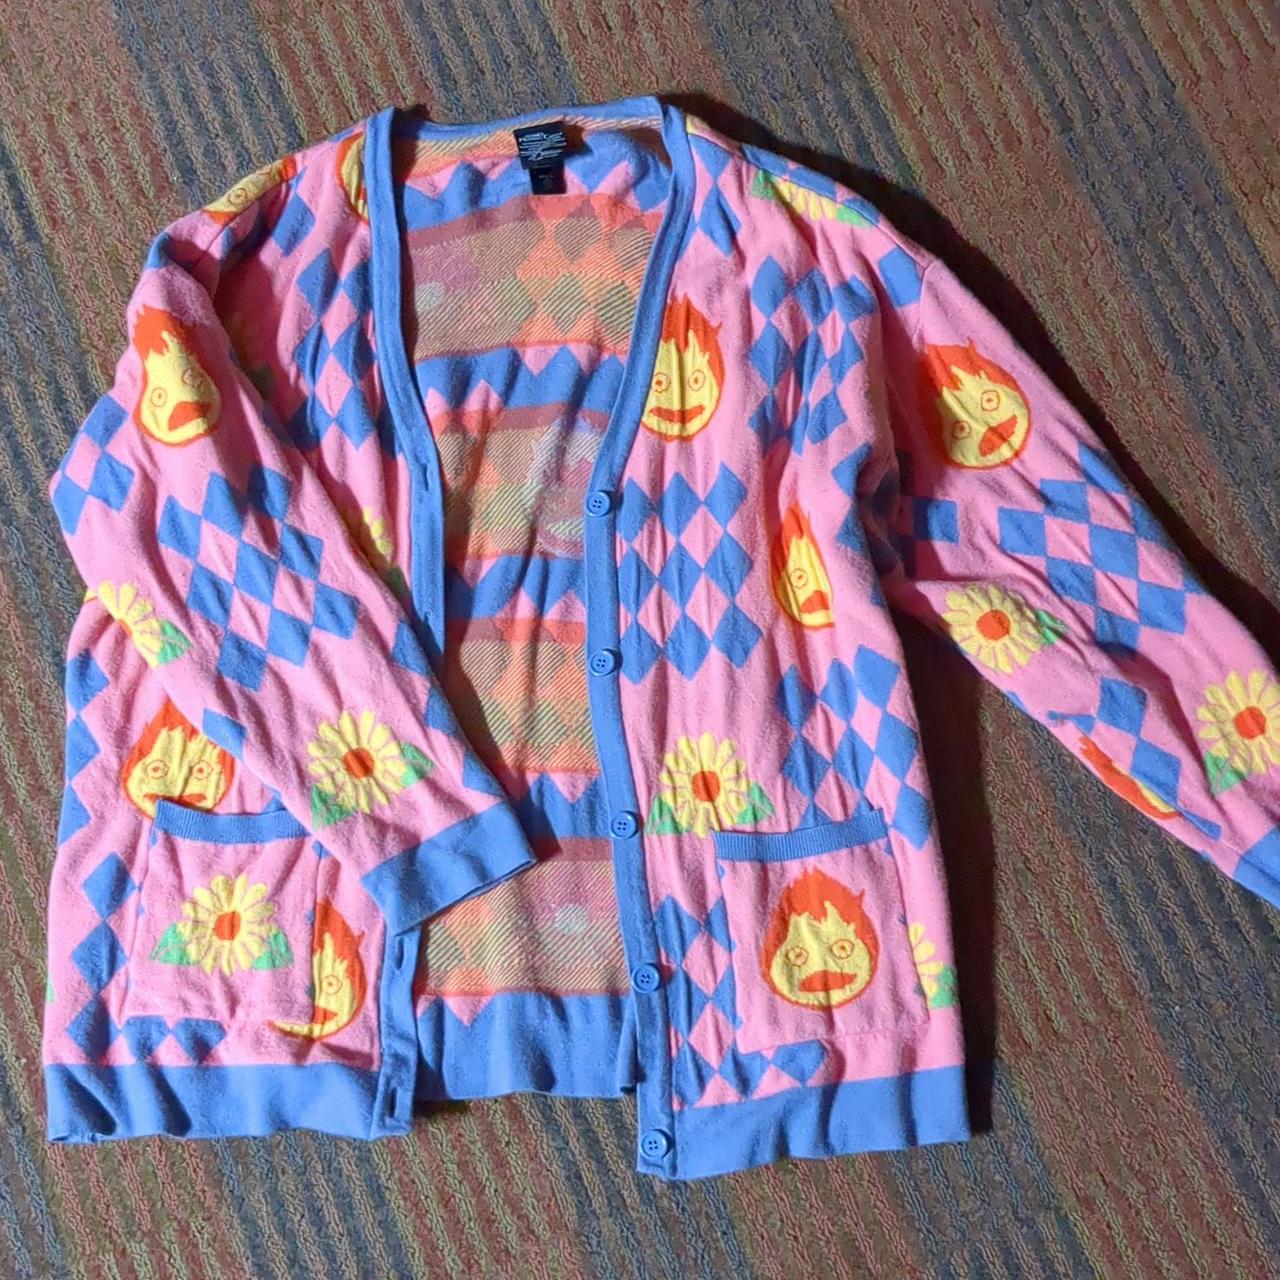 Men's Pink and Blue Cardigan